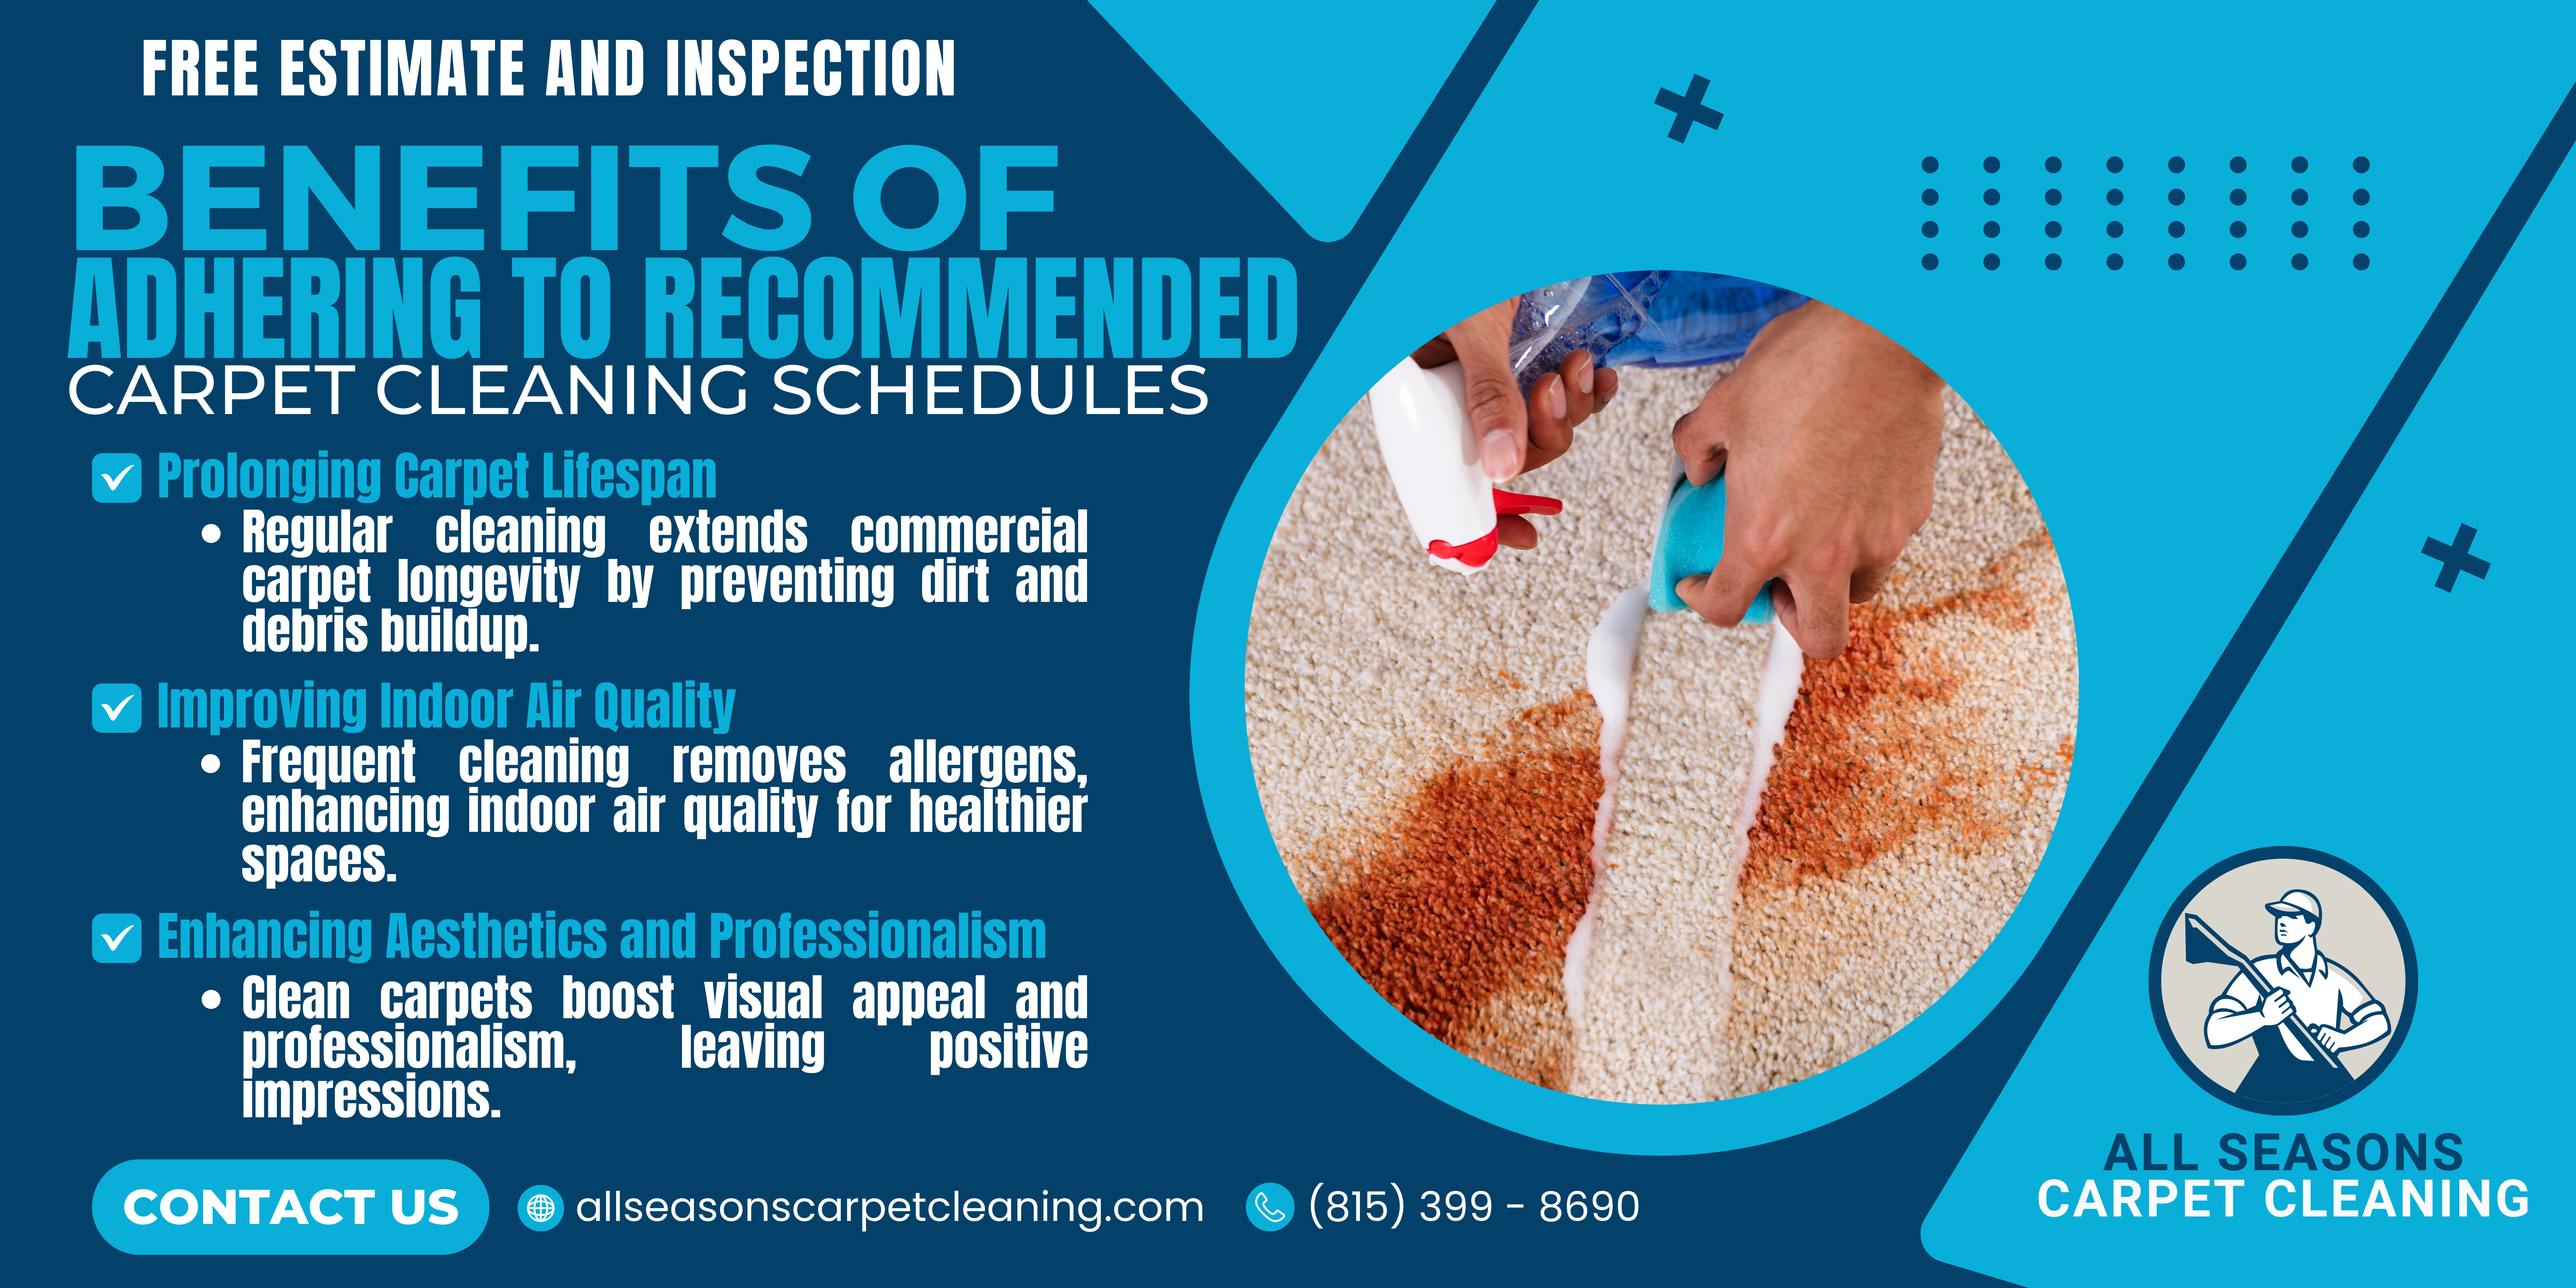 Commercial Carpet Cleaning Frequency